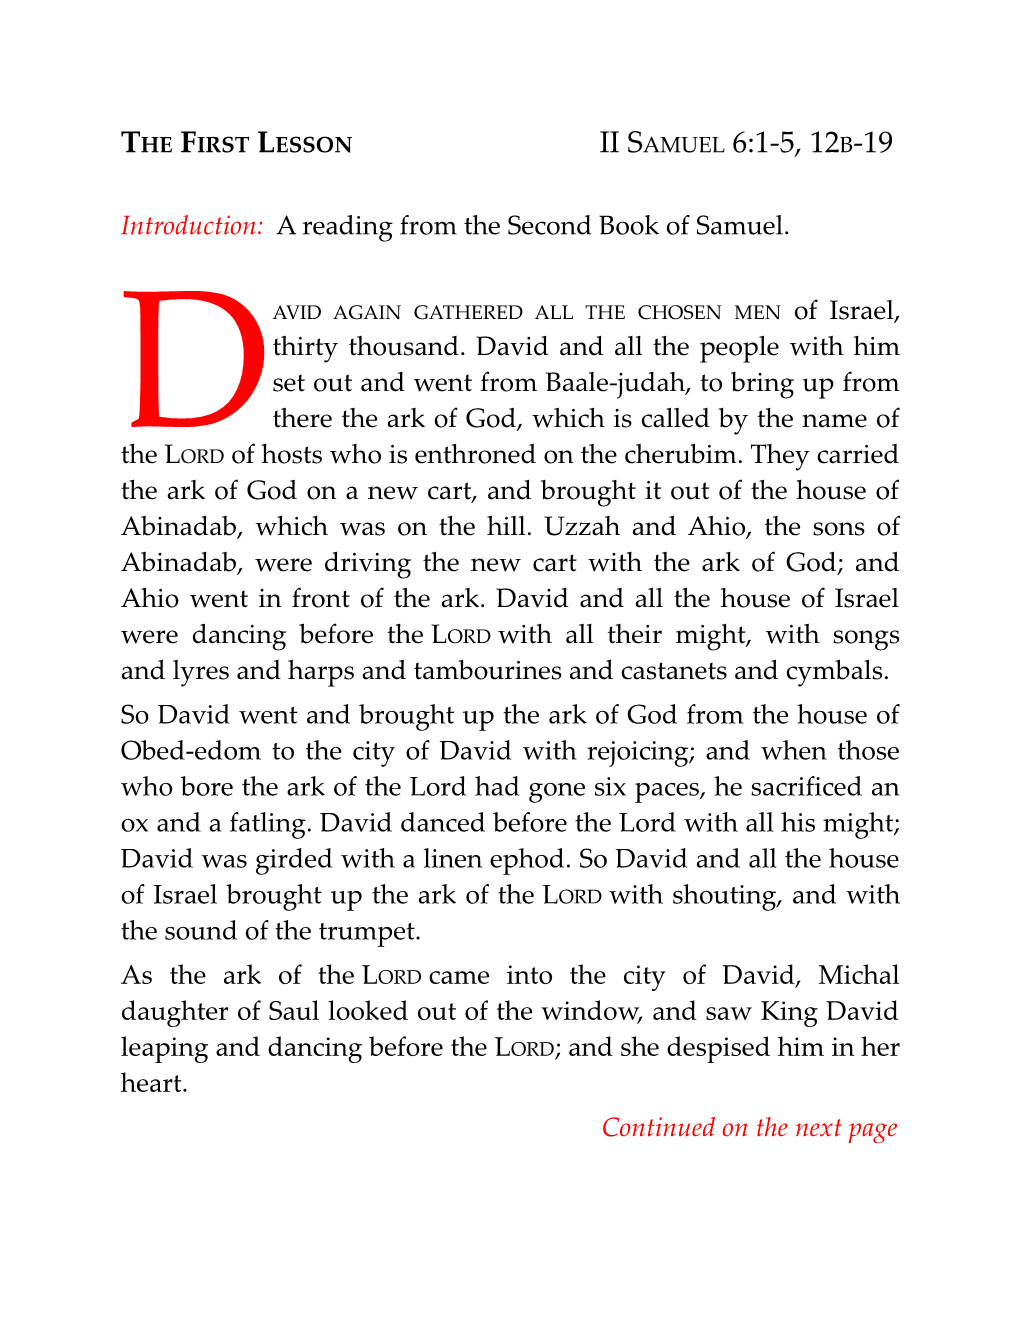 Introduction: a Reading from Thesecond Book of Samuel